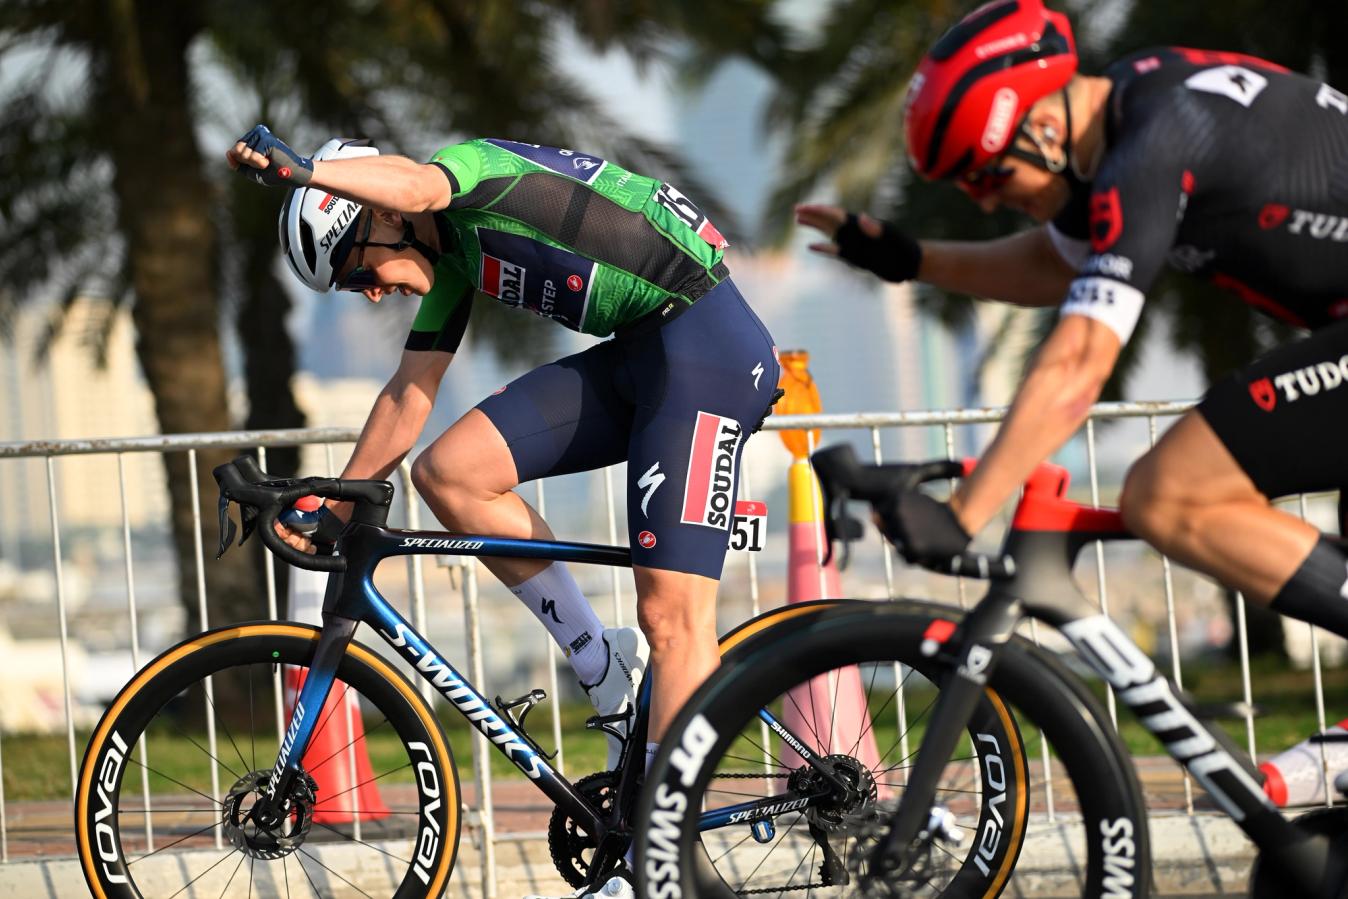 Sealing his points jersey success on stage 6, Tim Merlier became the first rider to ever win three stages of the same UAE Tour